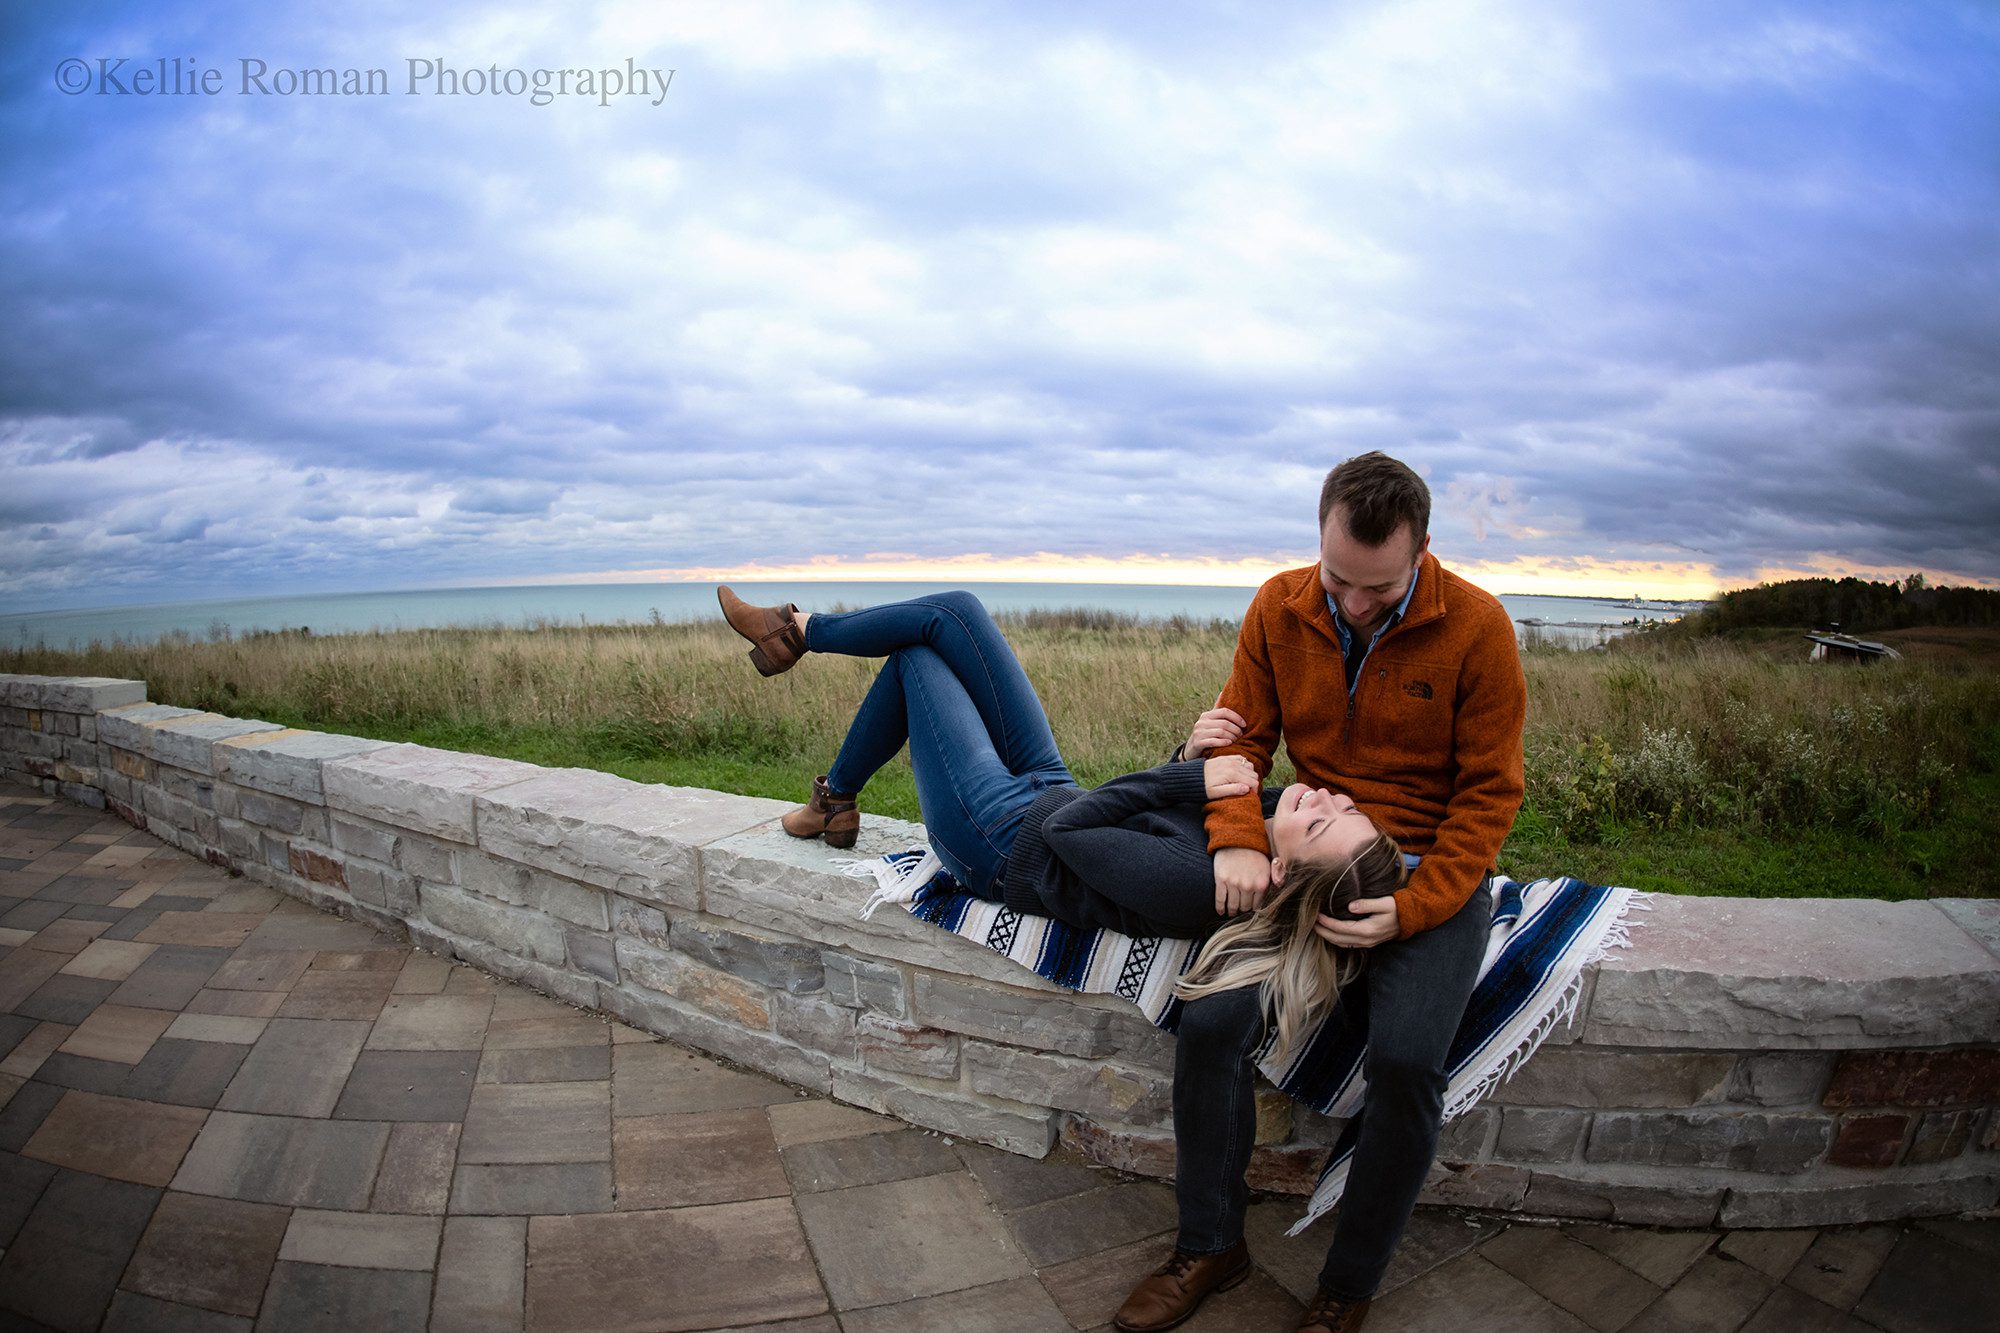 chilly sunrise a couple is at Lake Michigan during the sunrise. The man is sitting on a brick wall white his wife is laying with her head in his lap. the sky is cloudy with shades of purple, pink and blue. they couple is smiling and looking at each other